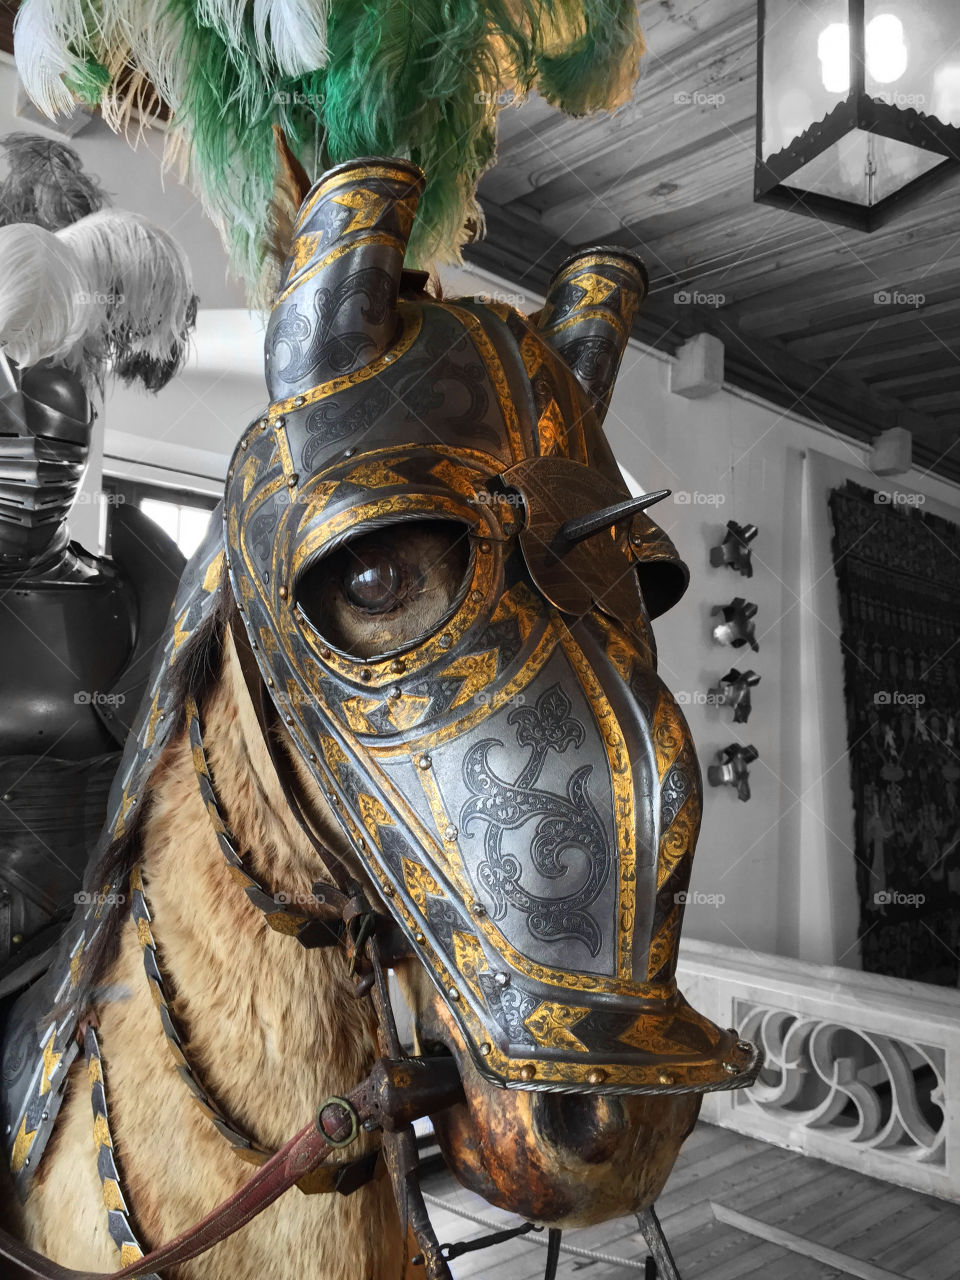 Horse's Armour
Coburg Castle
Germany